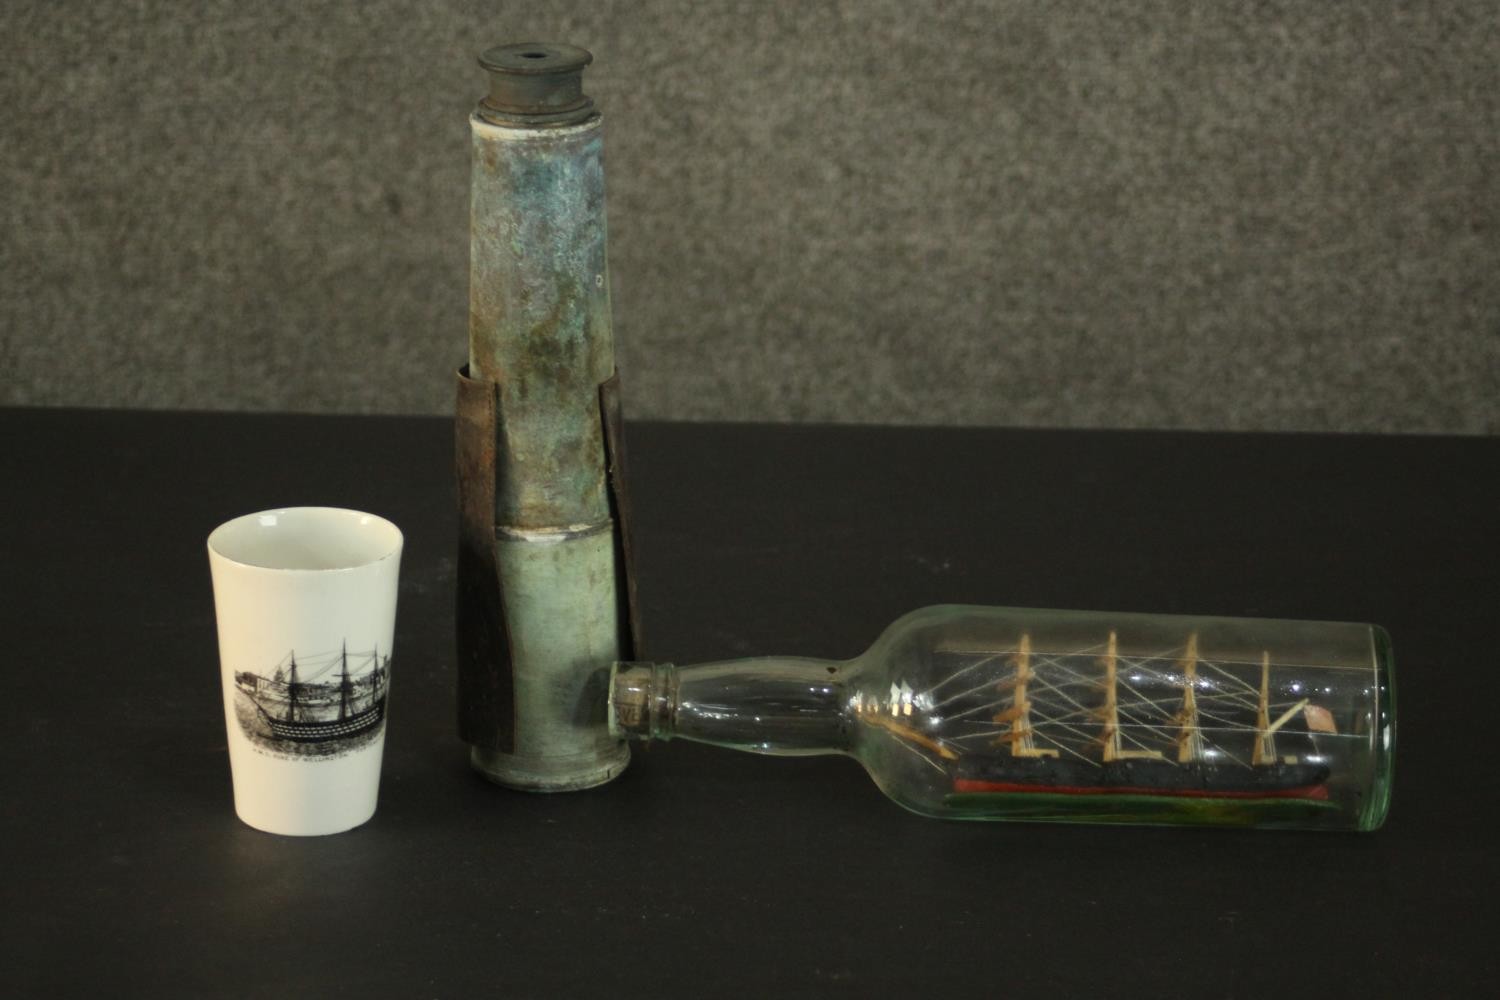 A carved and painted ship in a bottle along with a telescope and a transfer printed ship design